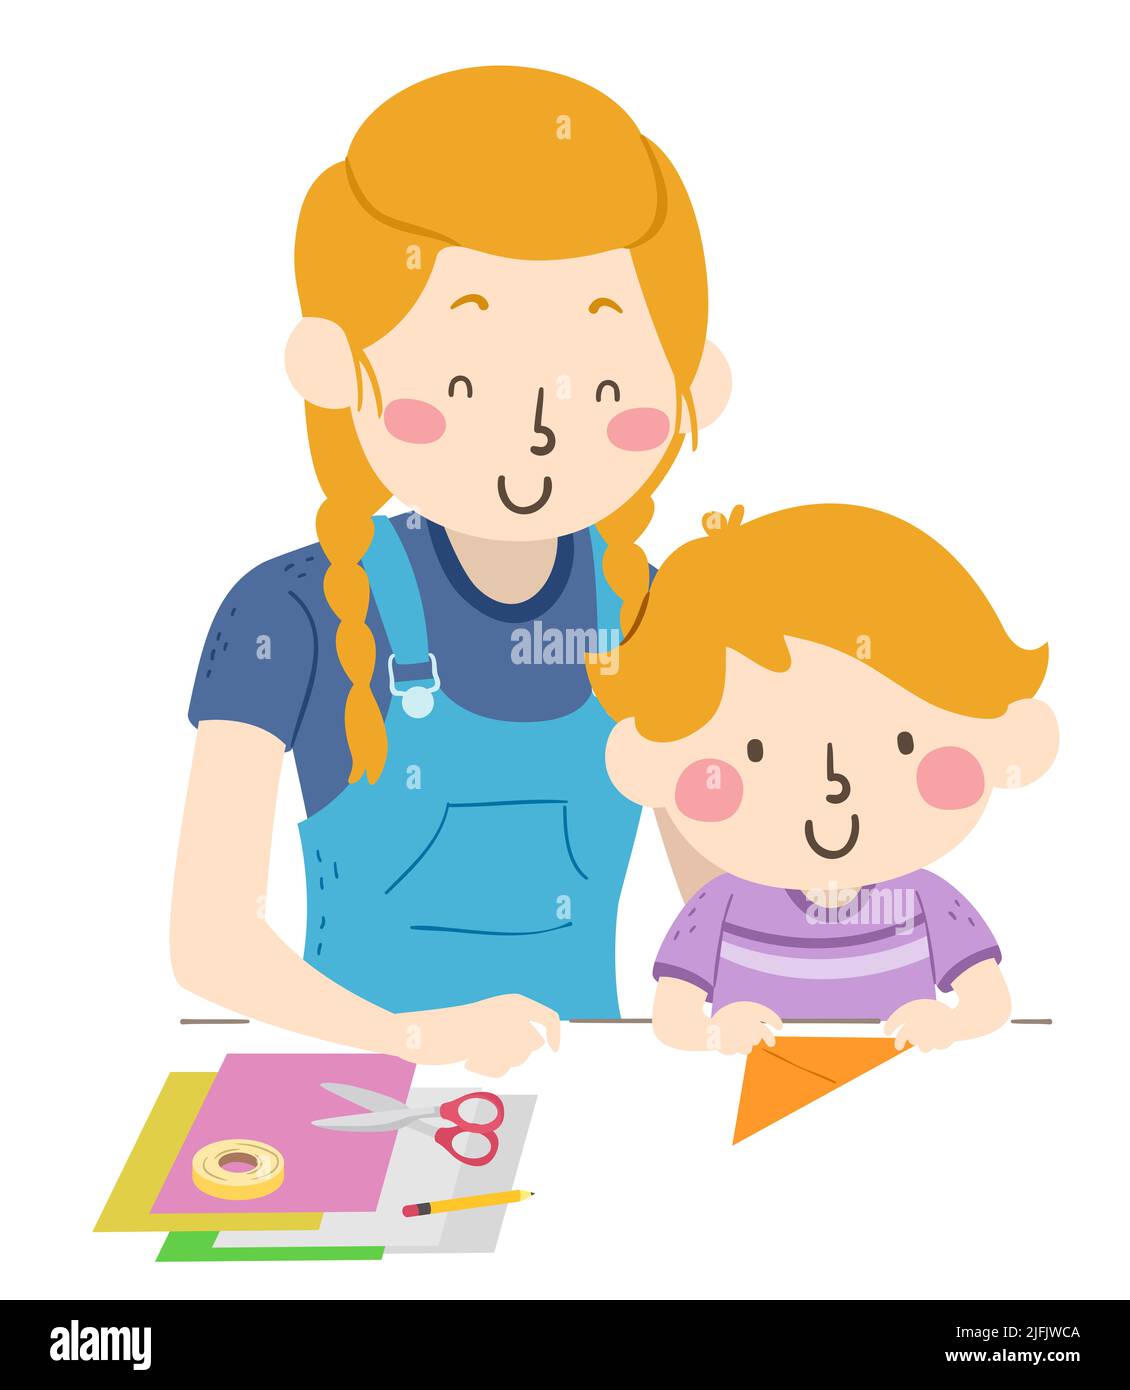 Illustration of Kid Boy Folding a Paper Using Craft Supplies with His Sister. Origami Stock Photo